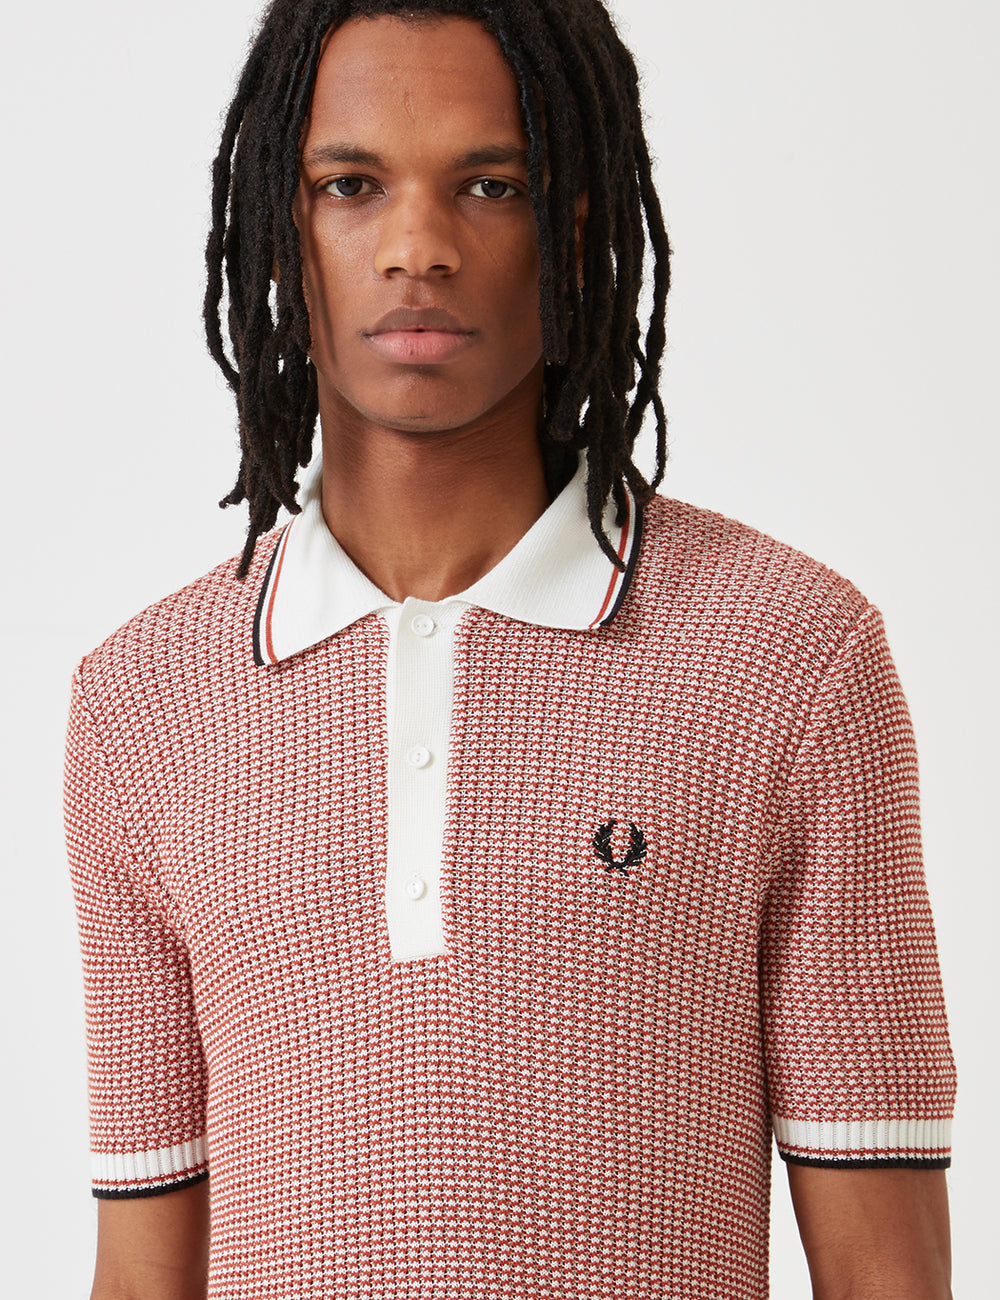 FRED PERRY ポロシャツ　ネイビーピンク